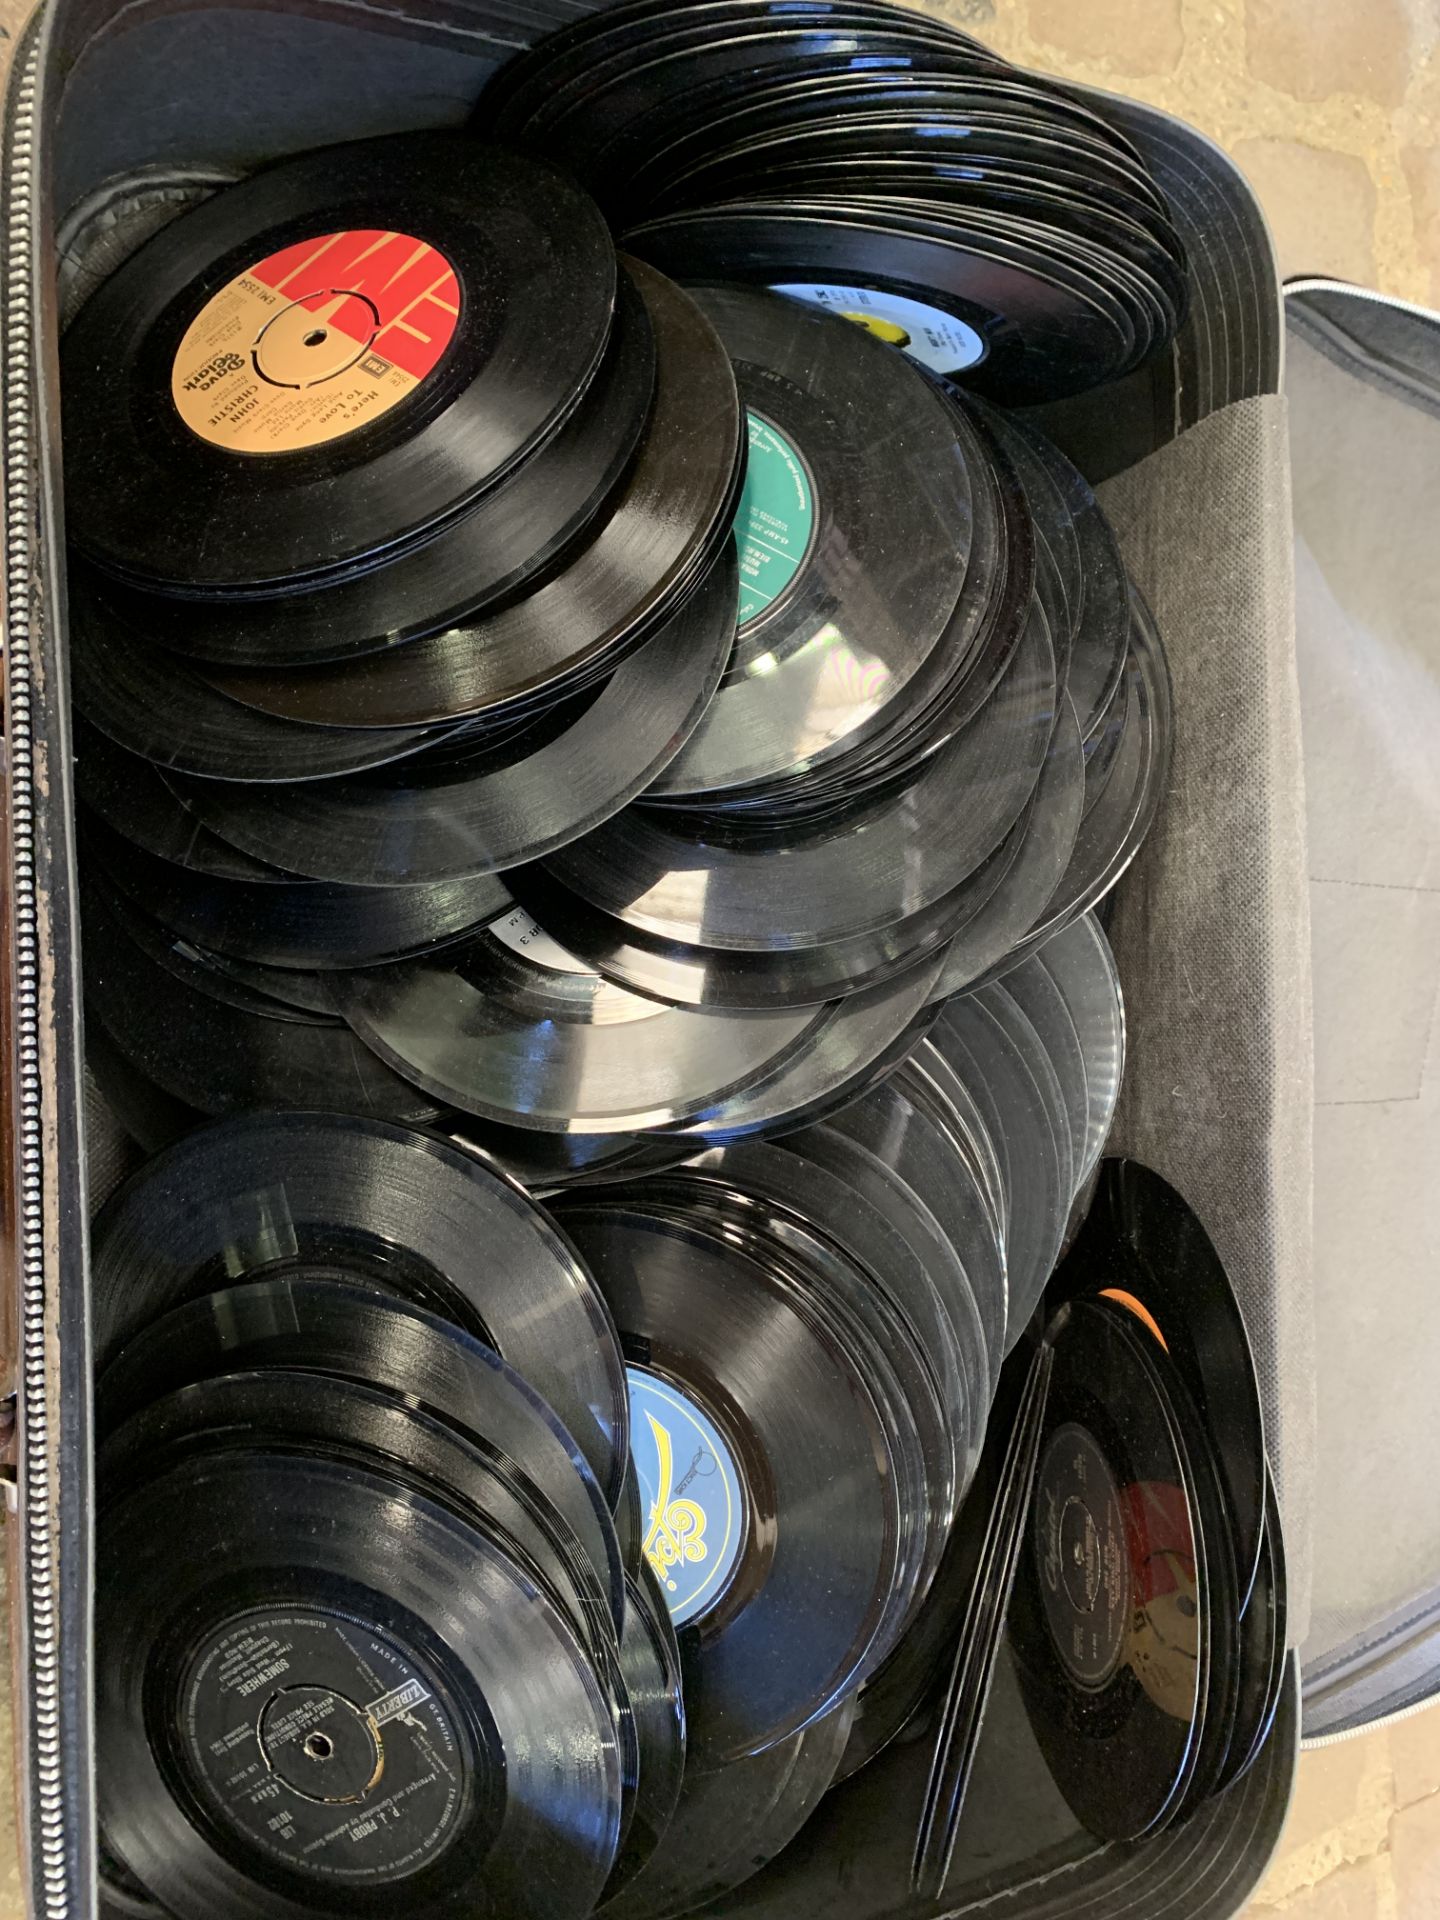 Suitcase containing approximately 300 7 inch singles